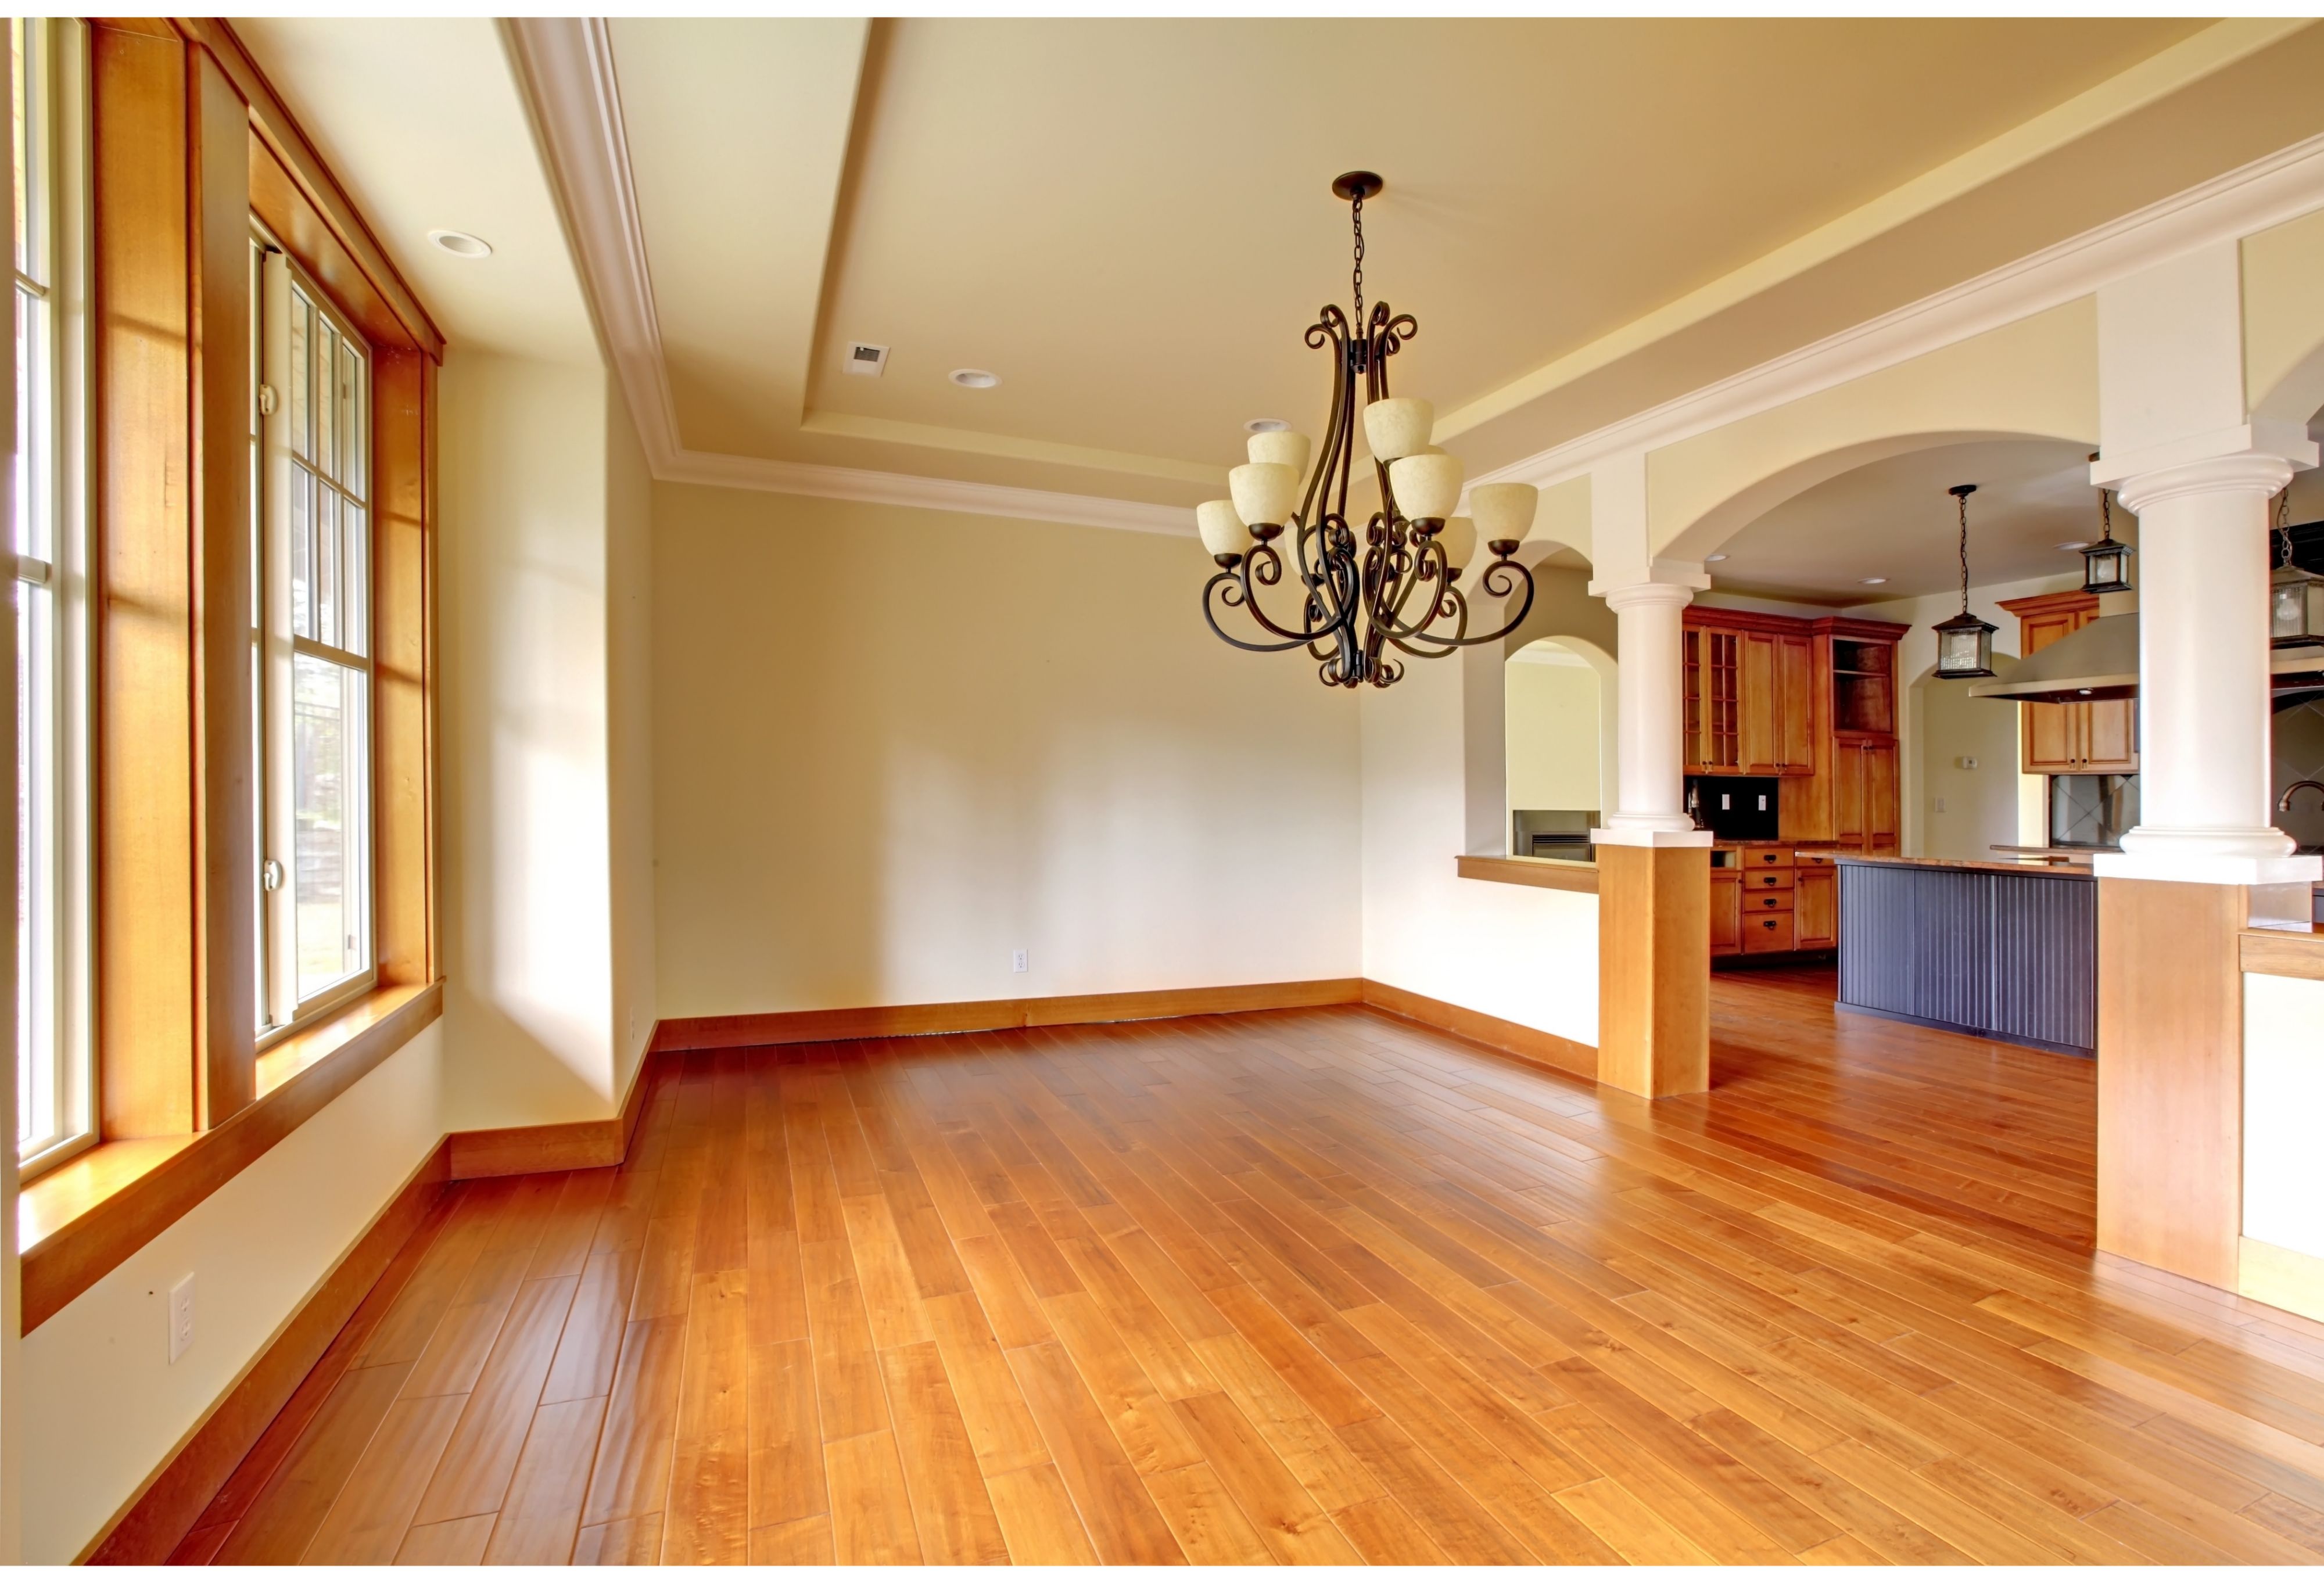 An Experienced Flooring Company in Miami Can Provide You with All Types of Hardwood